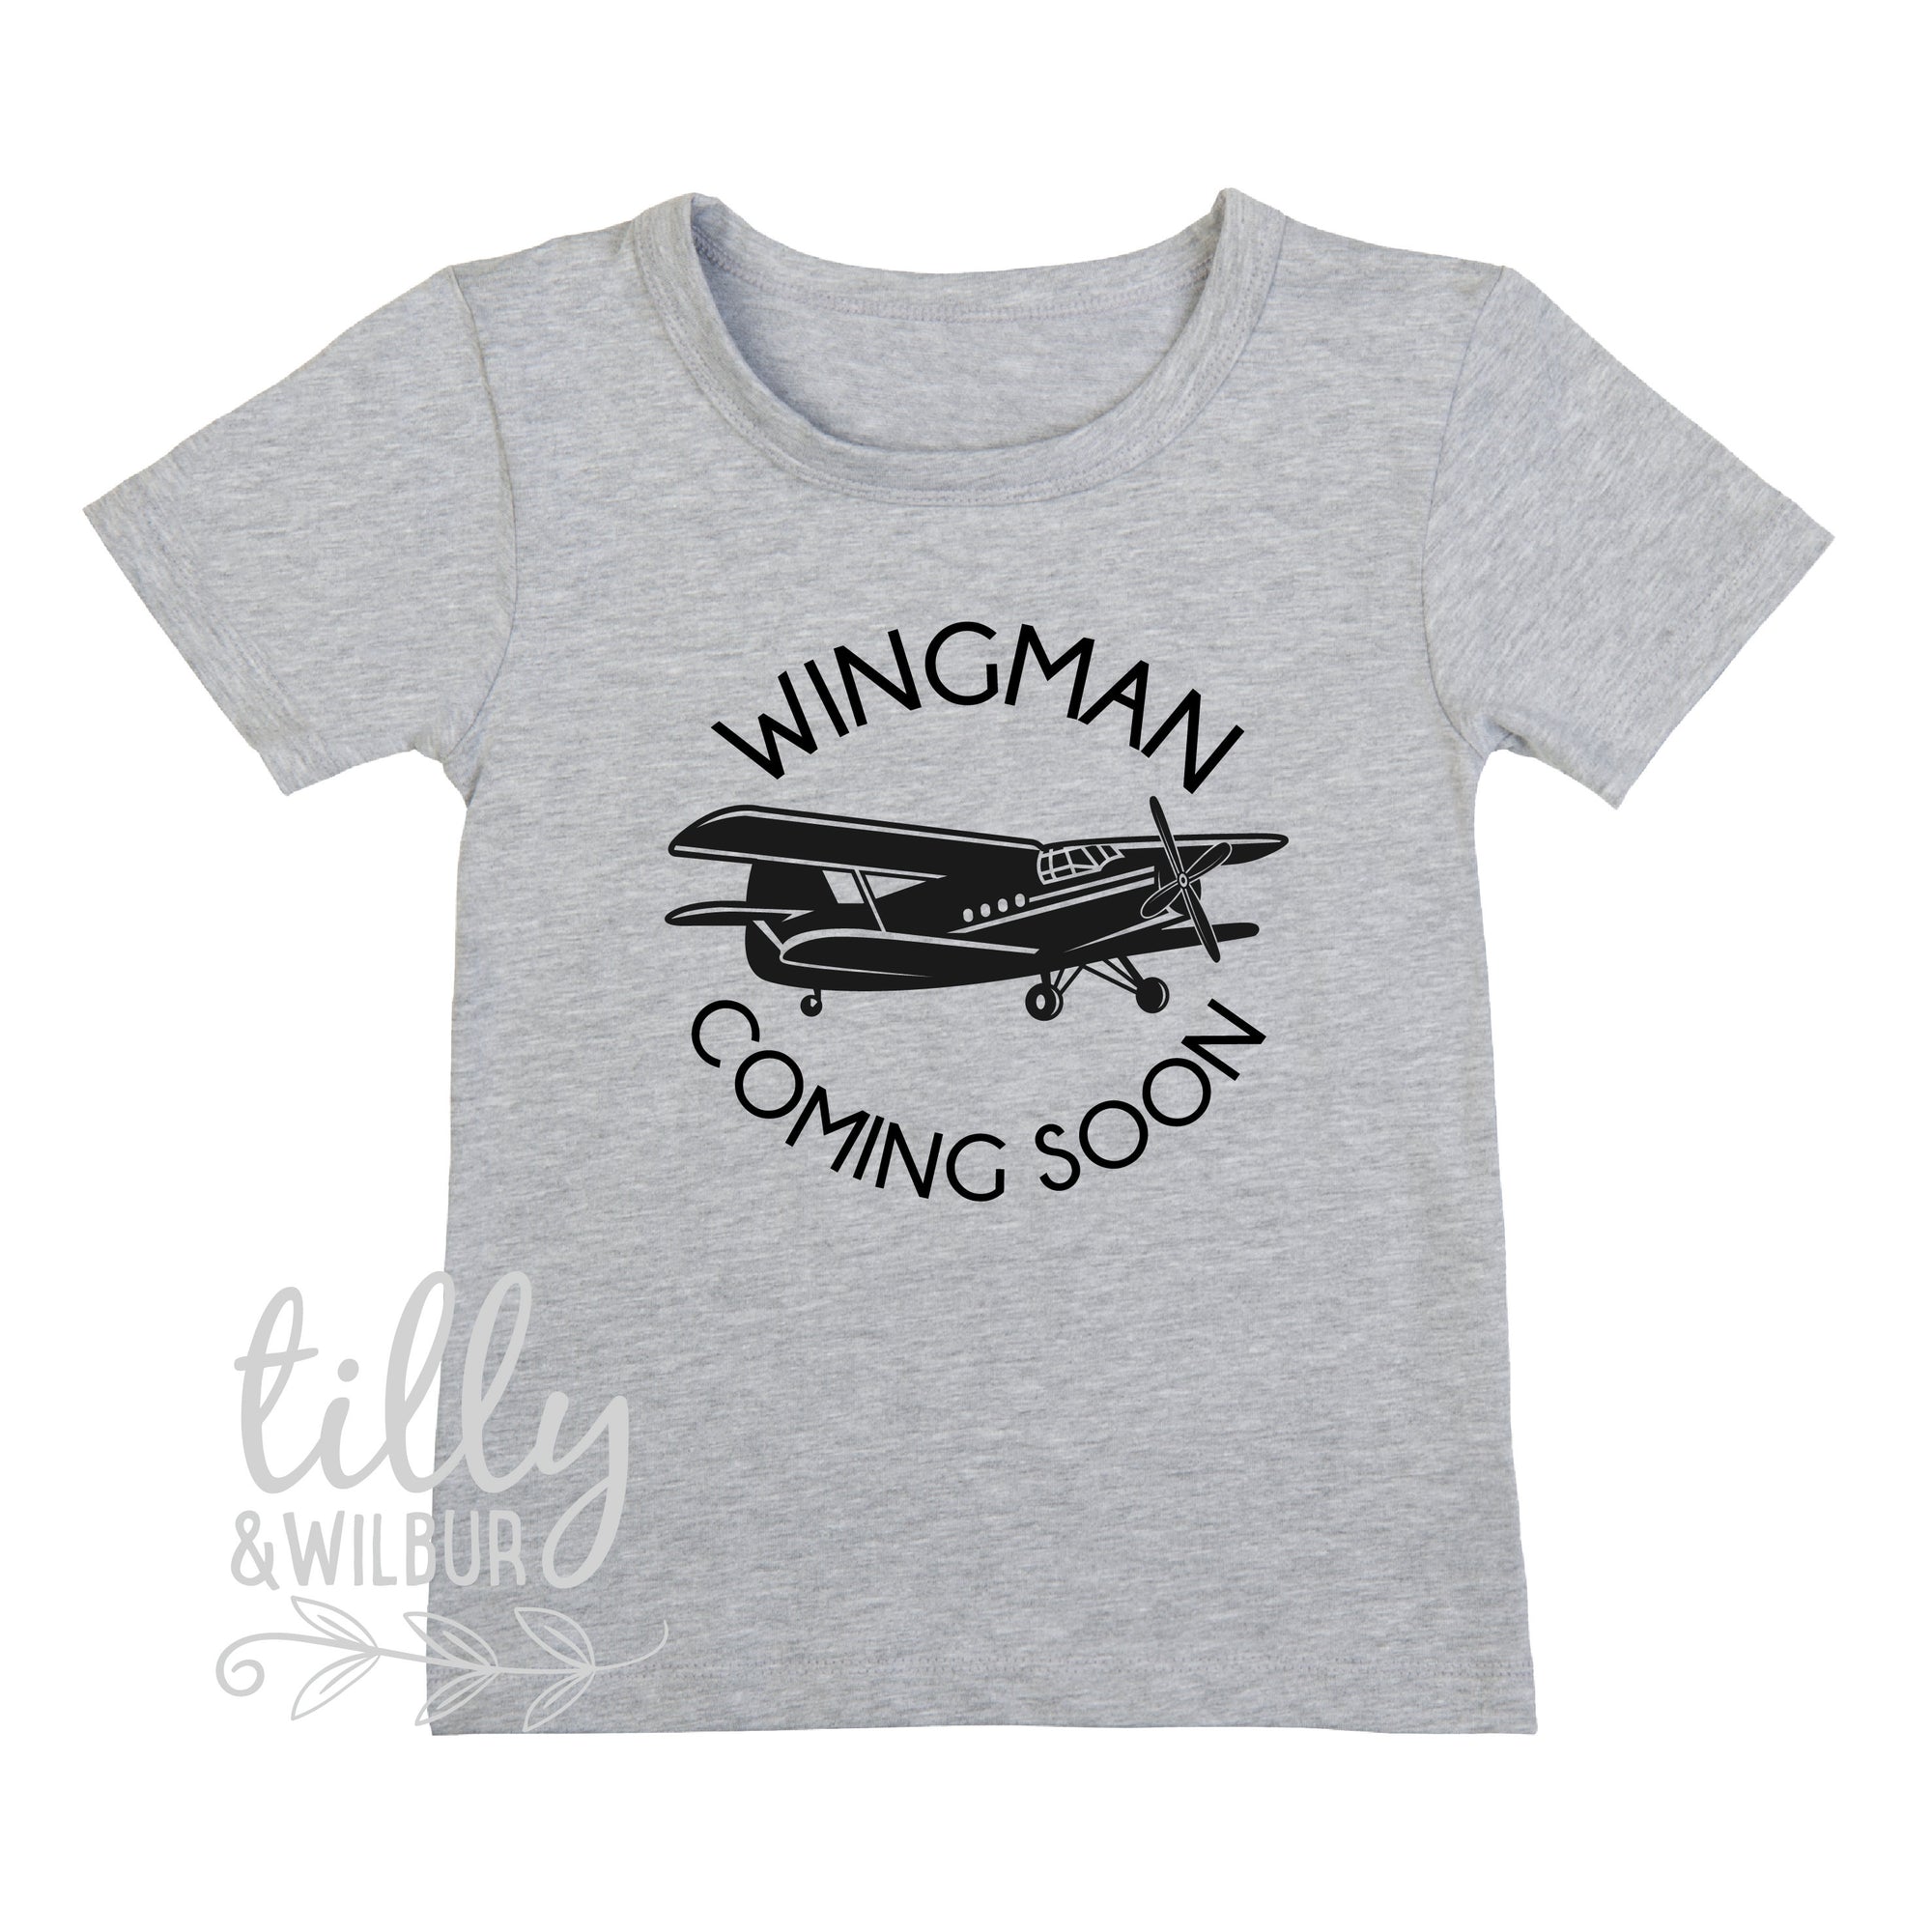 Wingman Coming Soon, Co-Pilot Coming Soon, Big Brother T-Shirt, Big Brother Gift, Pregnancy Announcement Shirt, Big Brother T-Shirt, Plane